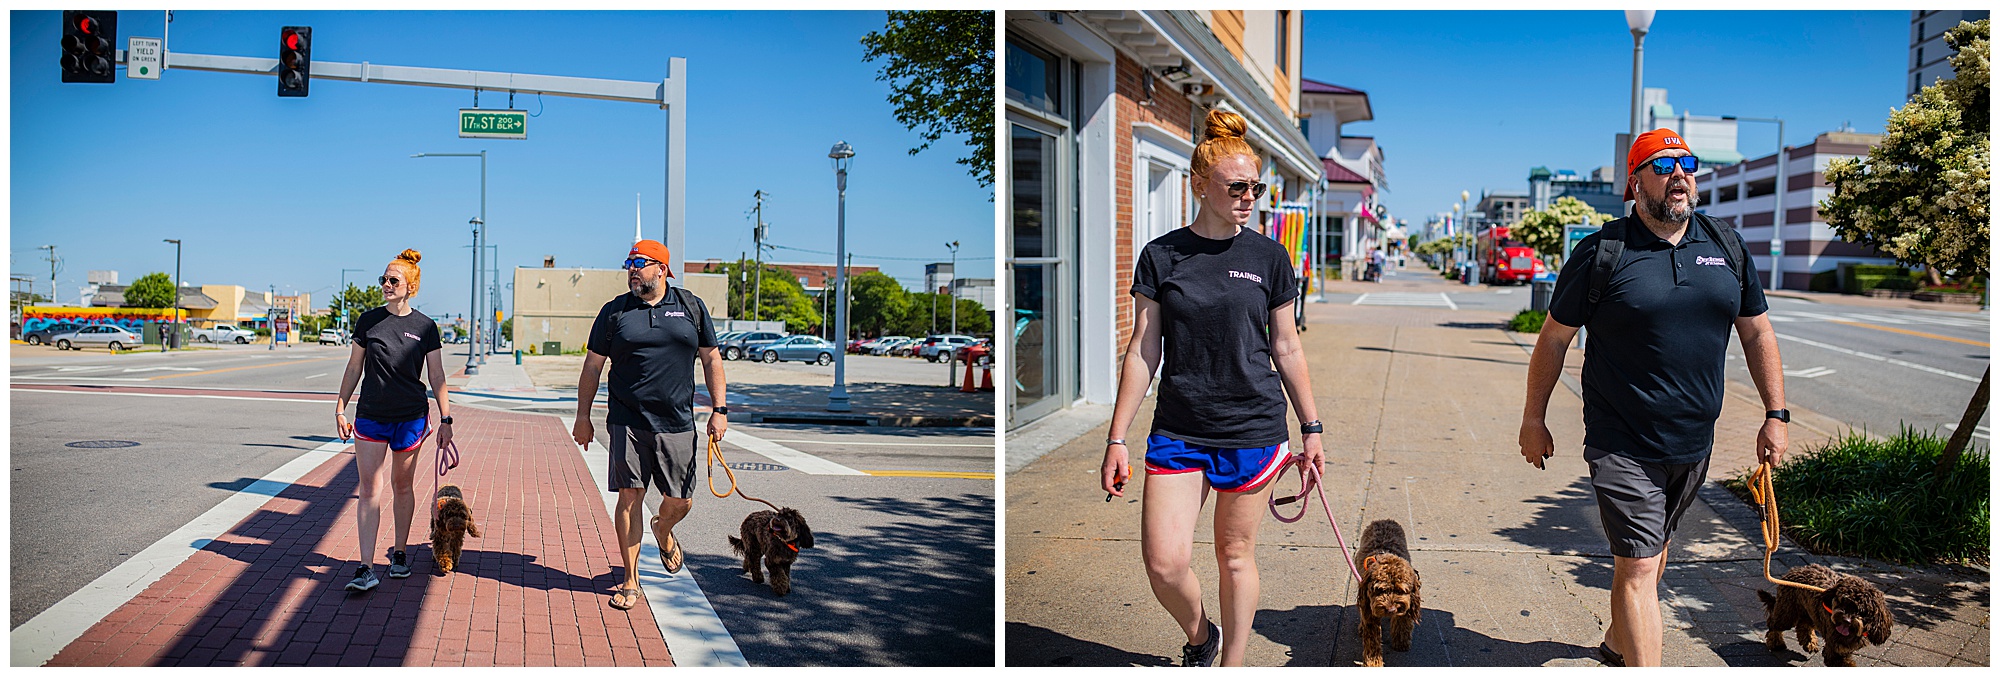 virginia beach dog trainers, misty saves the day, content creation hampton roads, content photography virginia beach